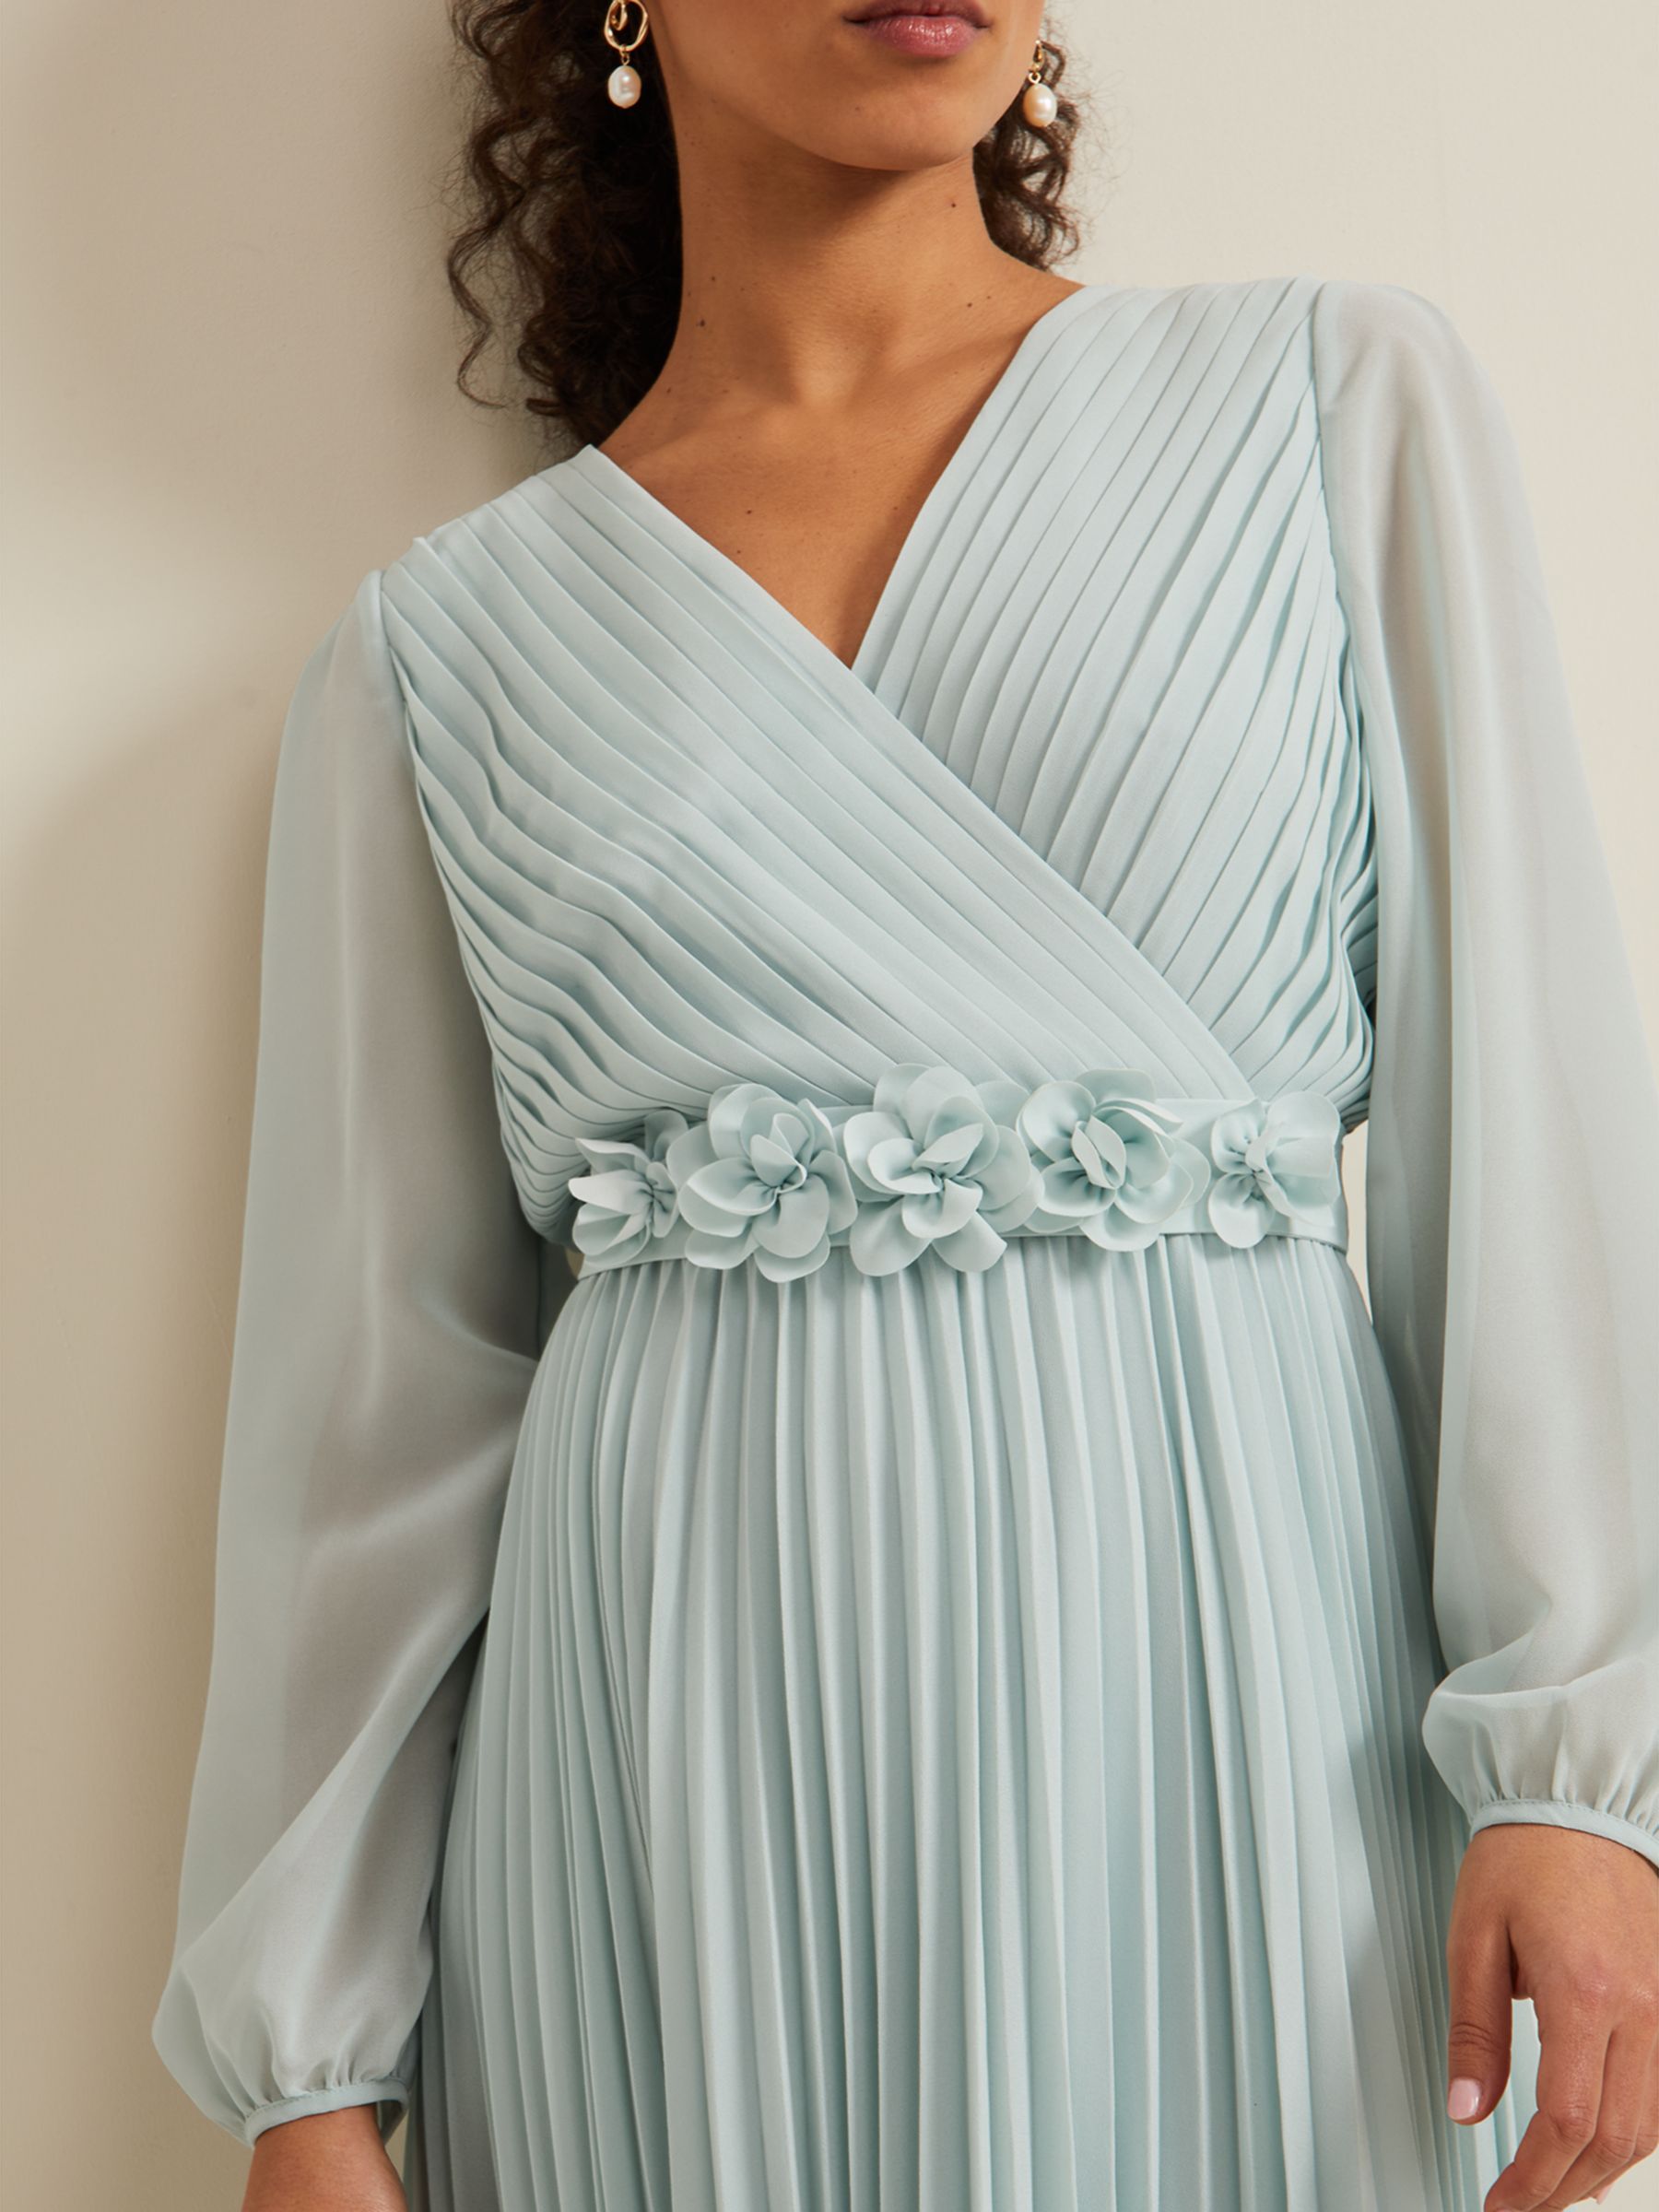 Buy Phase Eight Petite Alecia Pleated Maxi Dress Online at johnlewis.com